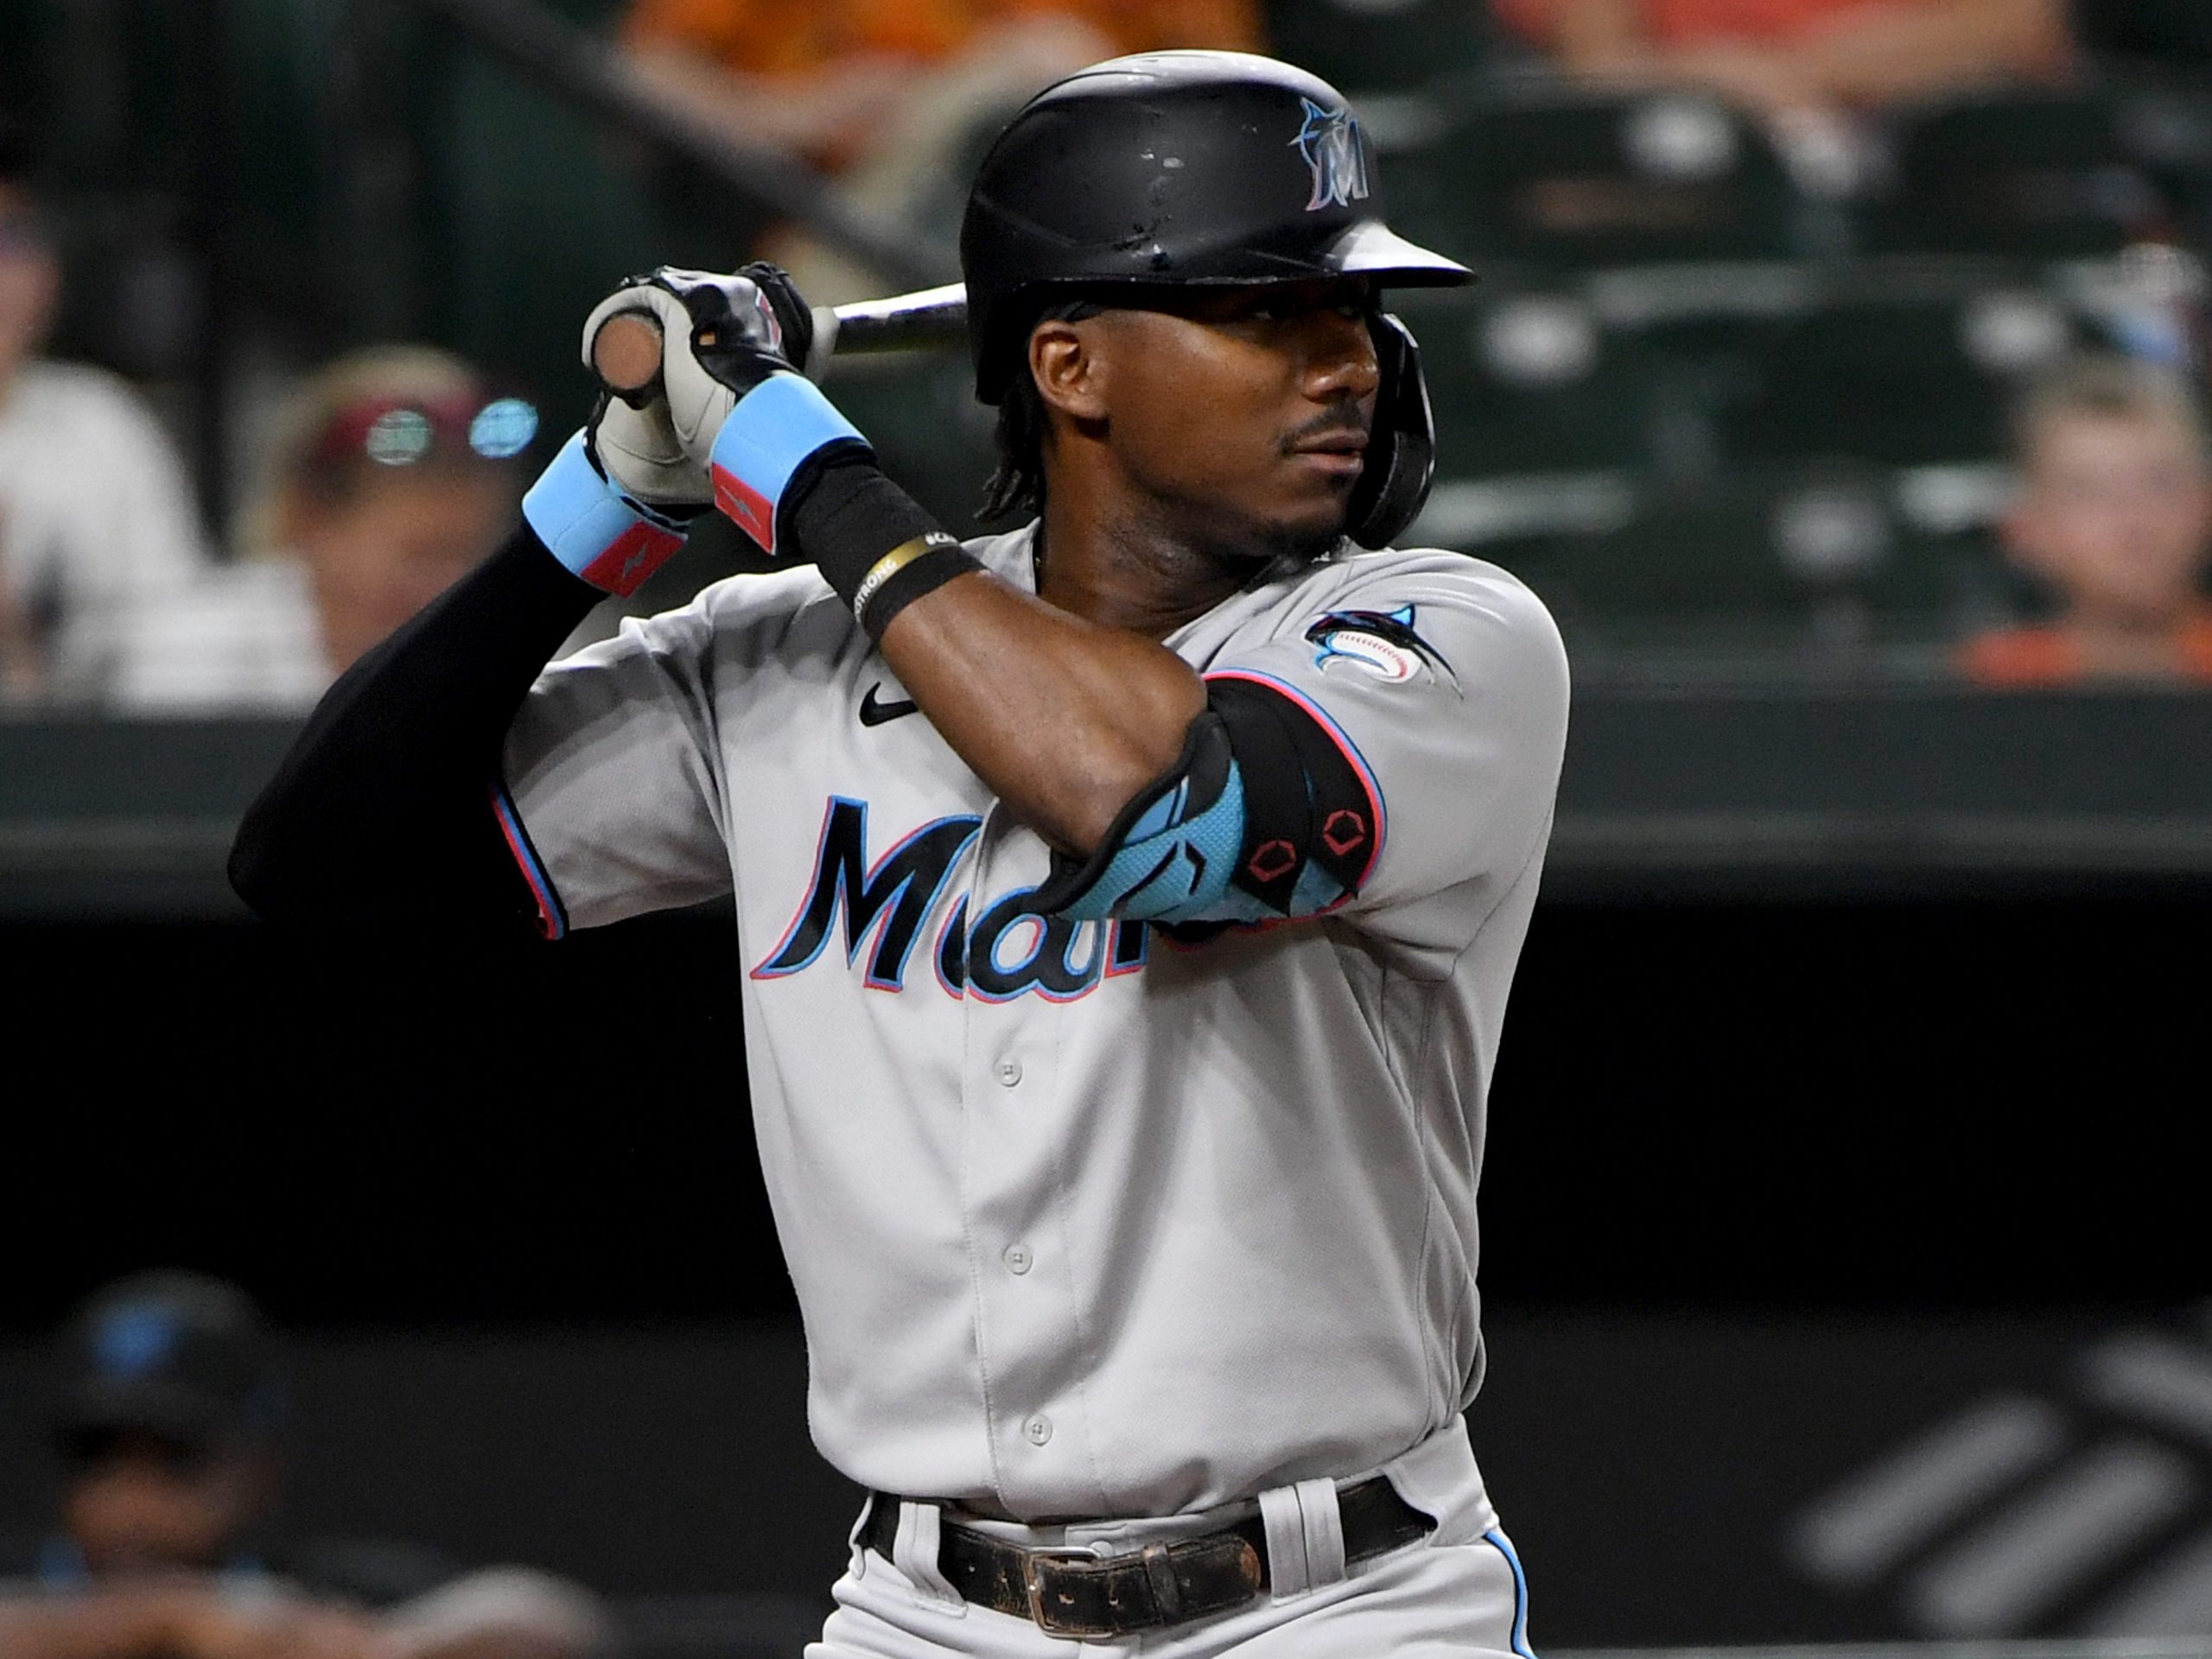 Lewis Brinson #25 of the Miami Marlins at bat against the Baltimore Orioles at Oriole Park at Camden Yards on July 28, 2021 in Baltimore, Maryland.